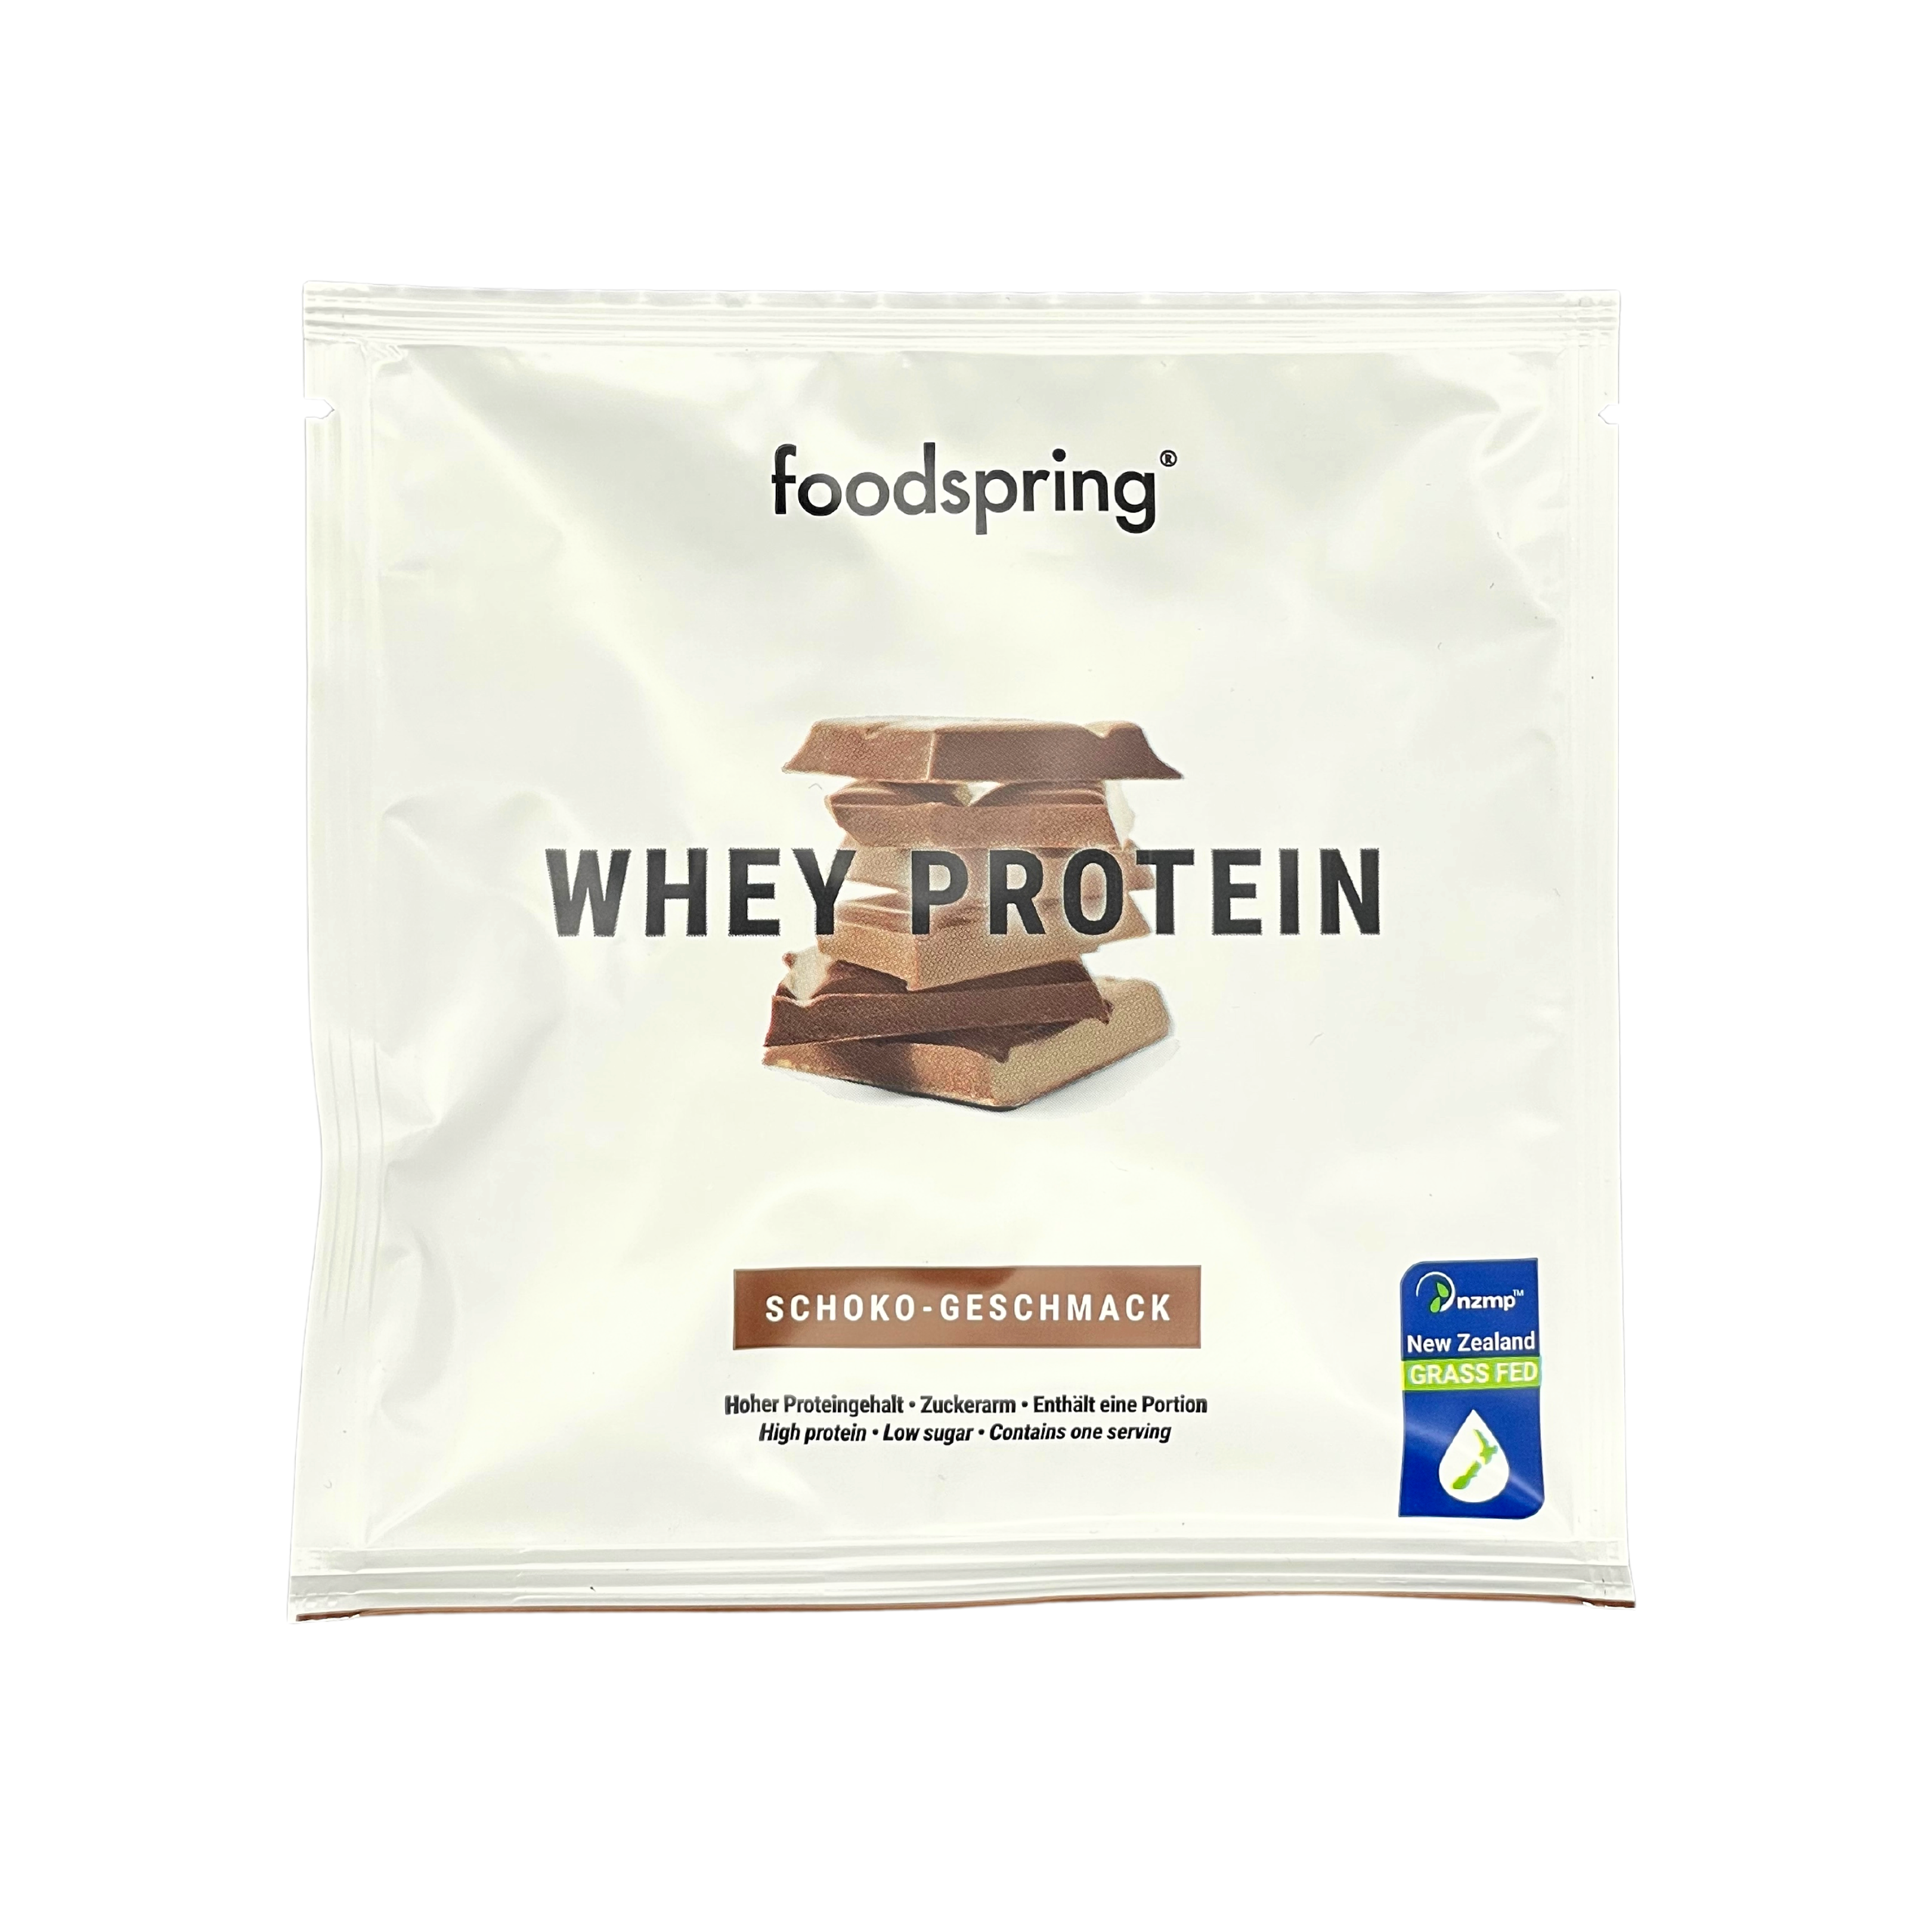 Foodspring Whey Protein Review